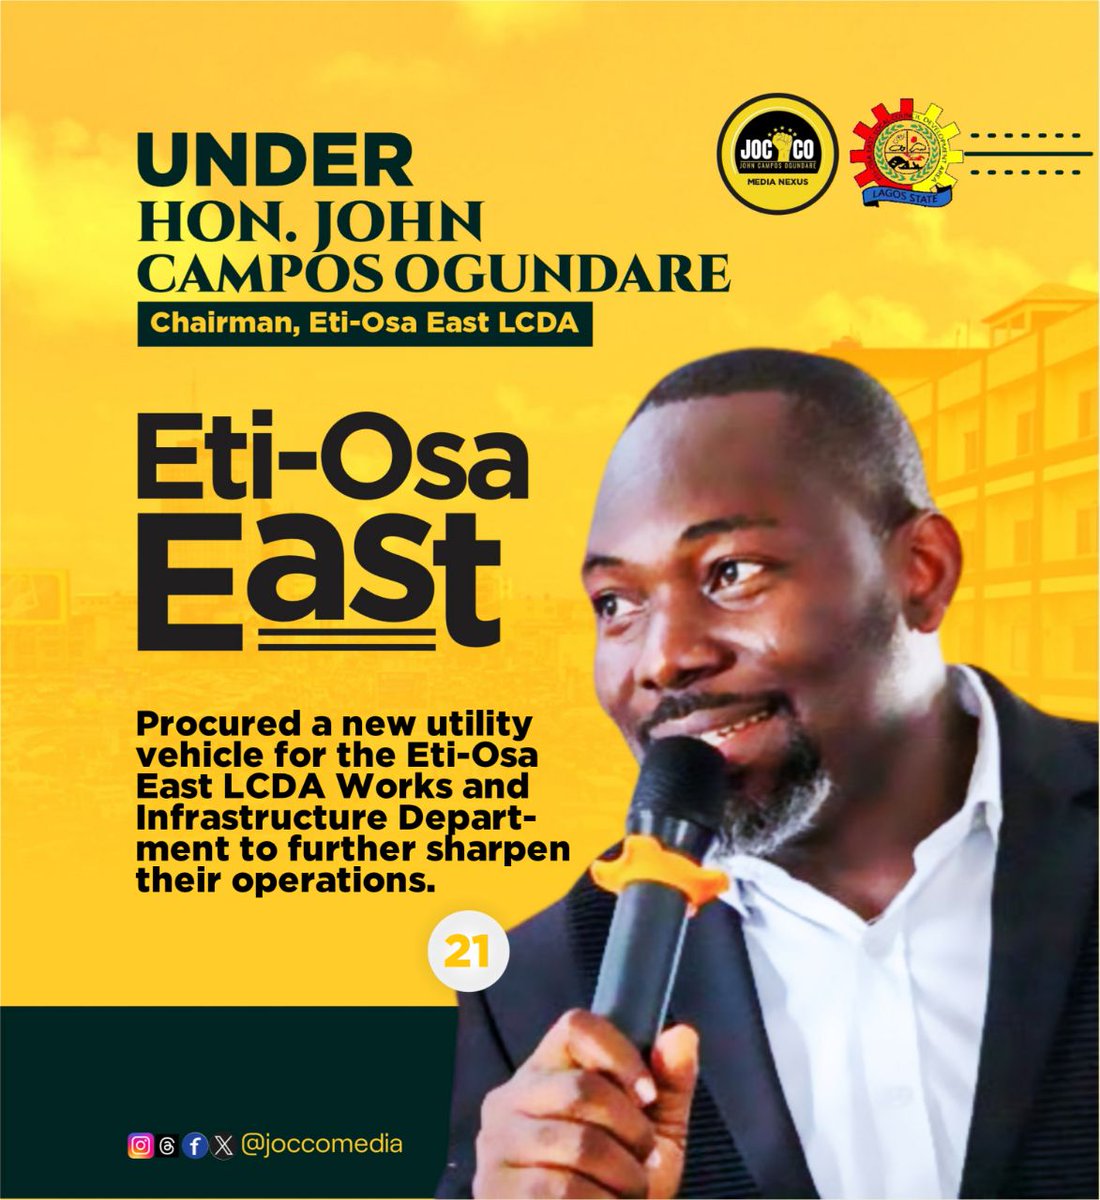 Episode 33

Attached is a flyer of what Eti-Osa East has done under the leadership of Hon. John Ogundare Campos. 

Watch out for more! 

#transportation&procurement
#evidencedey
#JoccoIsWorking 
#expectmore

Jocco Media Nexus